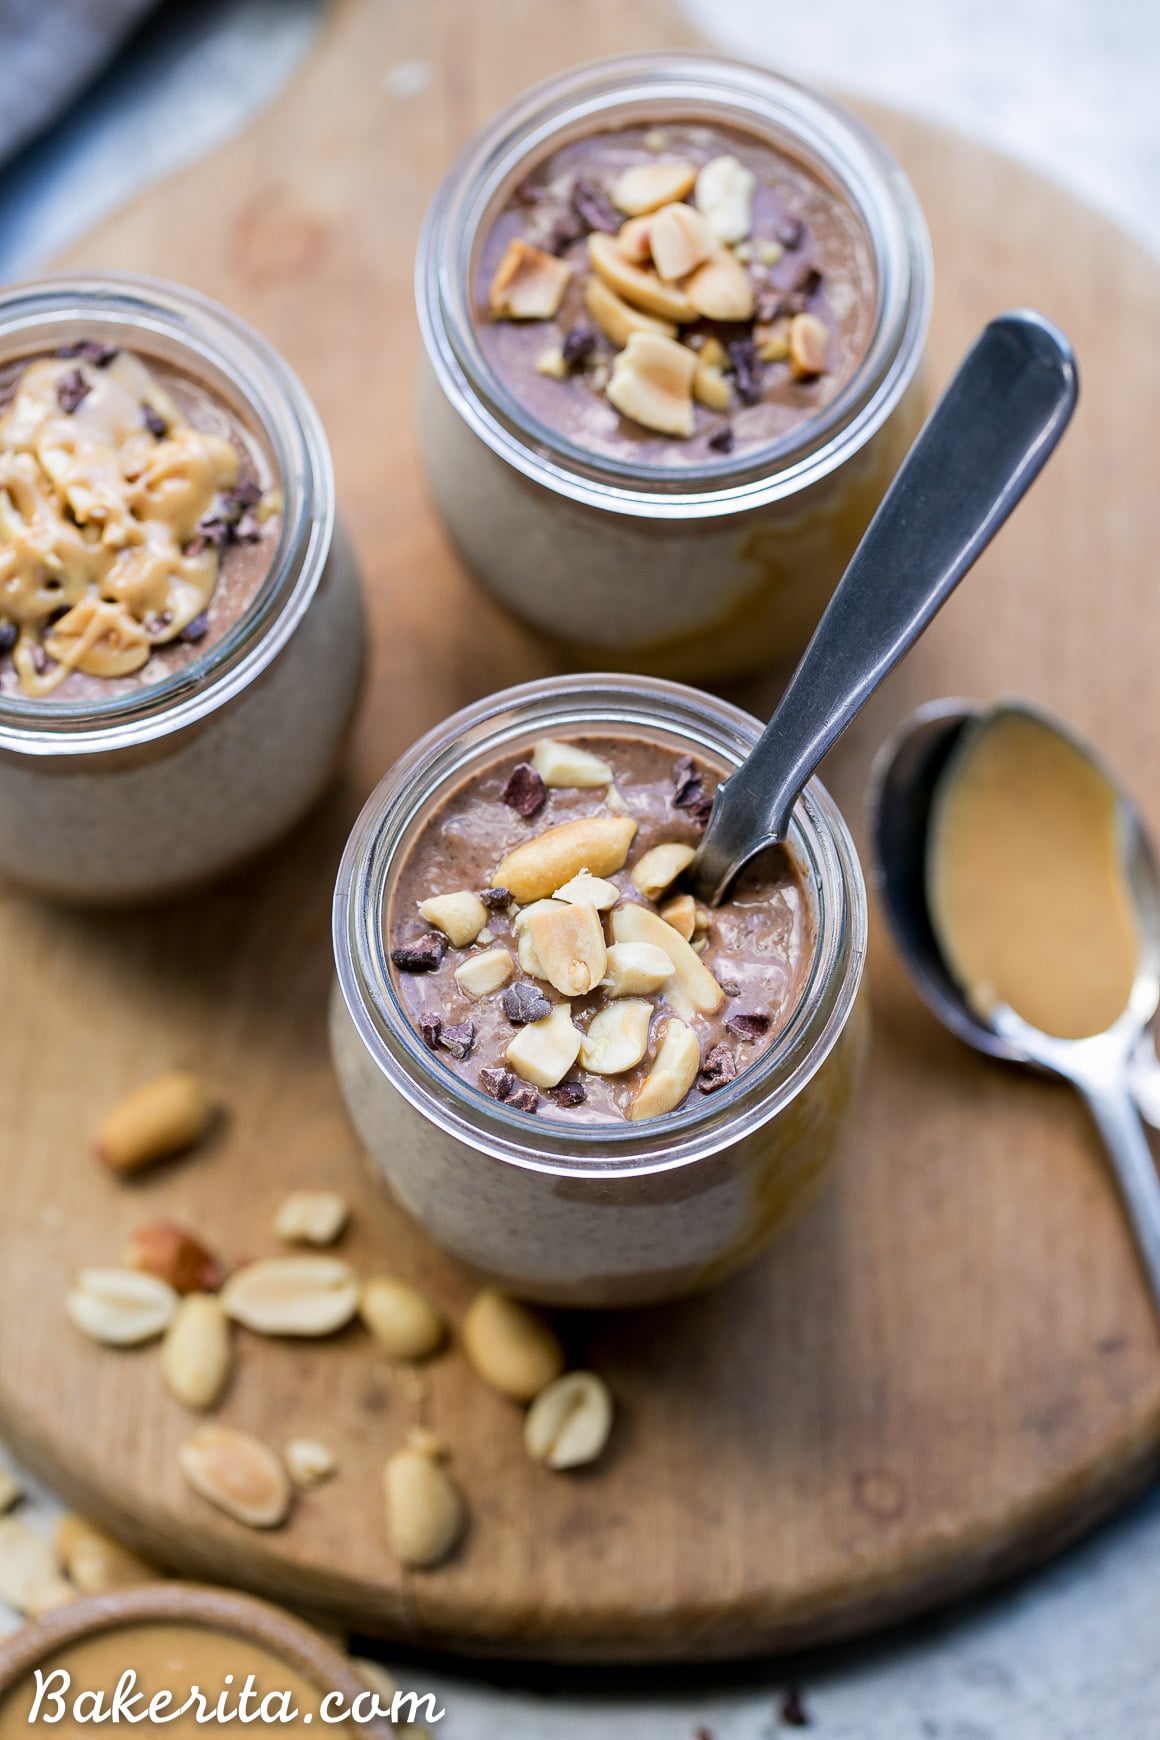 This Chocolate Peanut Butter Chia Pudding tastes like dessert, but it's made with wholesome ingredients that you can enjoy for breakfast! It's gluten-free, vegan, packed with protein, and it tastes like a peanut butter cup - what's not to love?